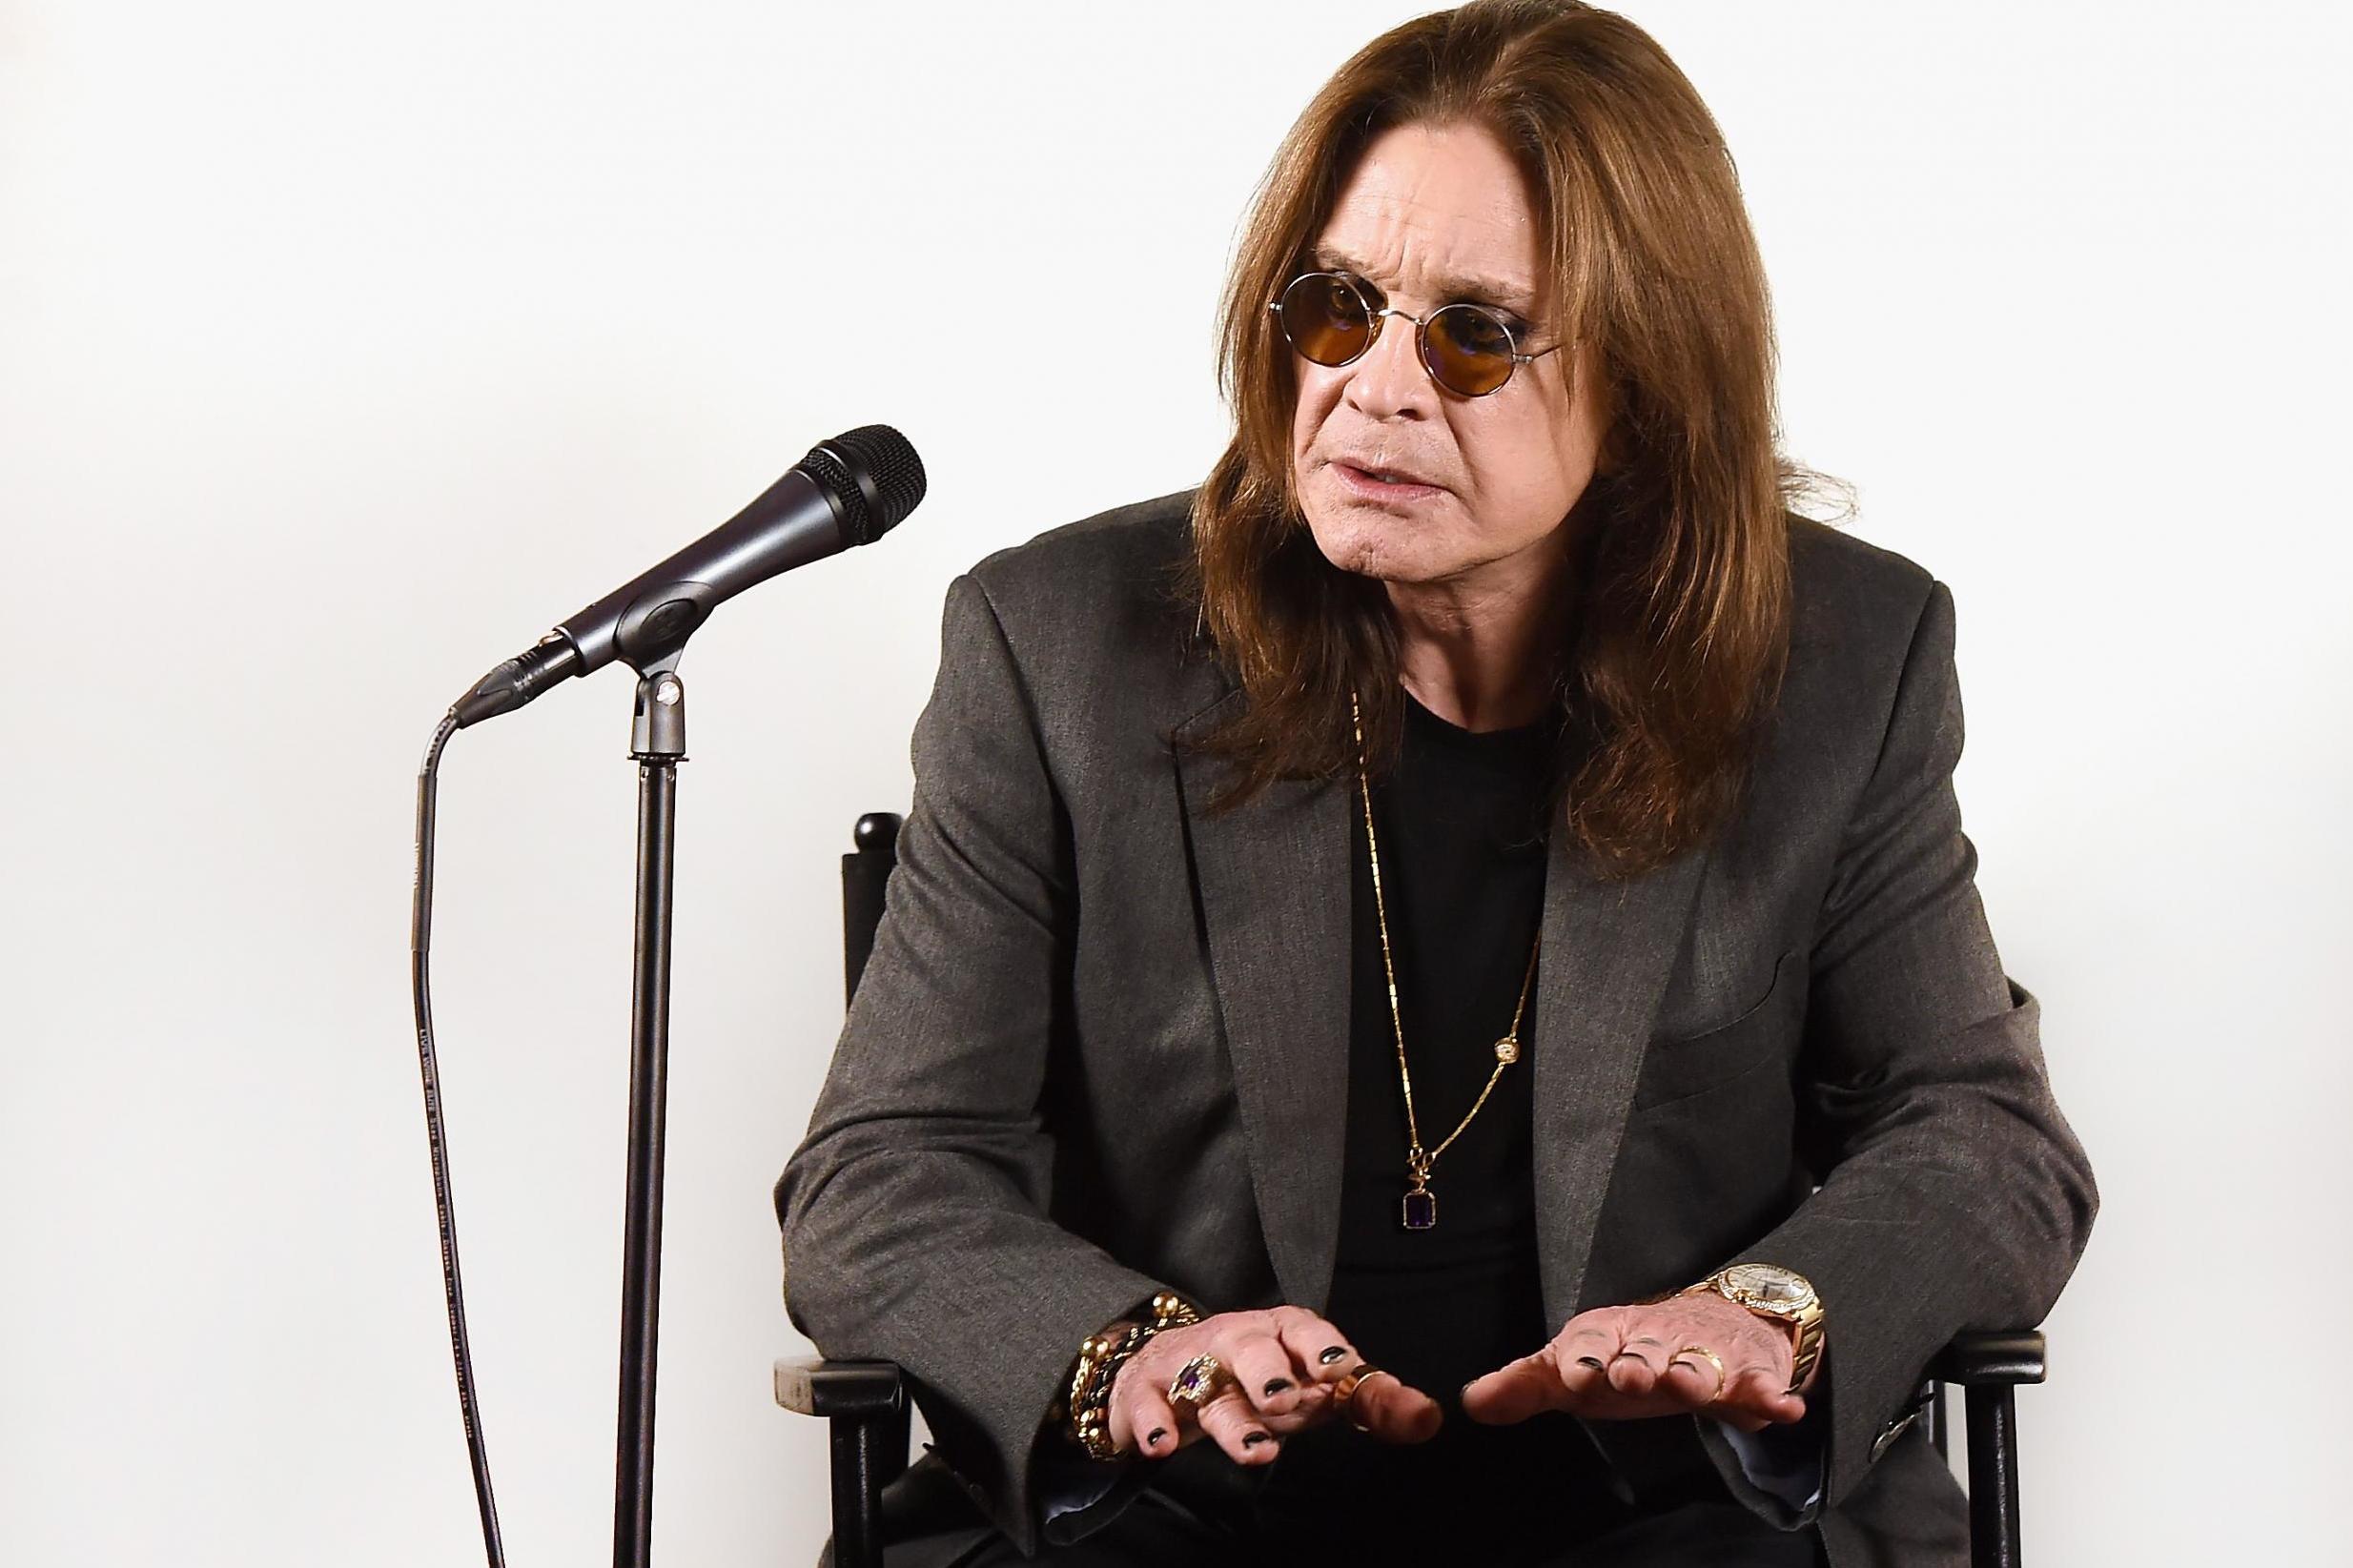 Ozzy Osbourne postpones all 2019 tour dates after suffering fall | The Independent